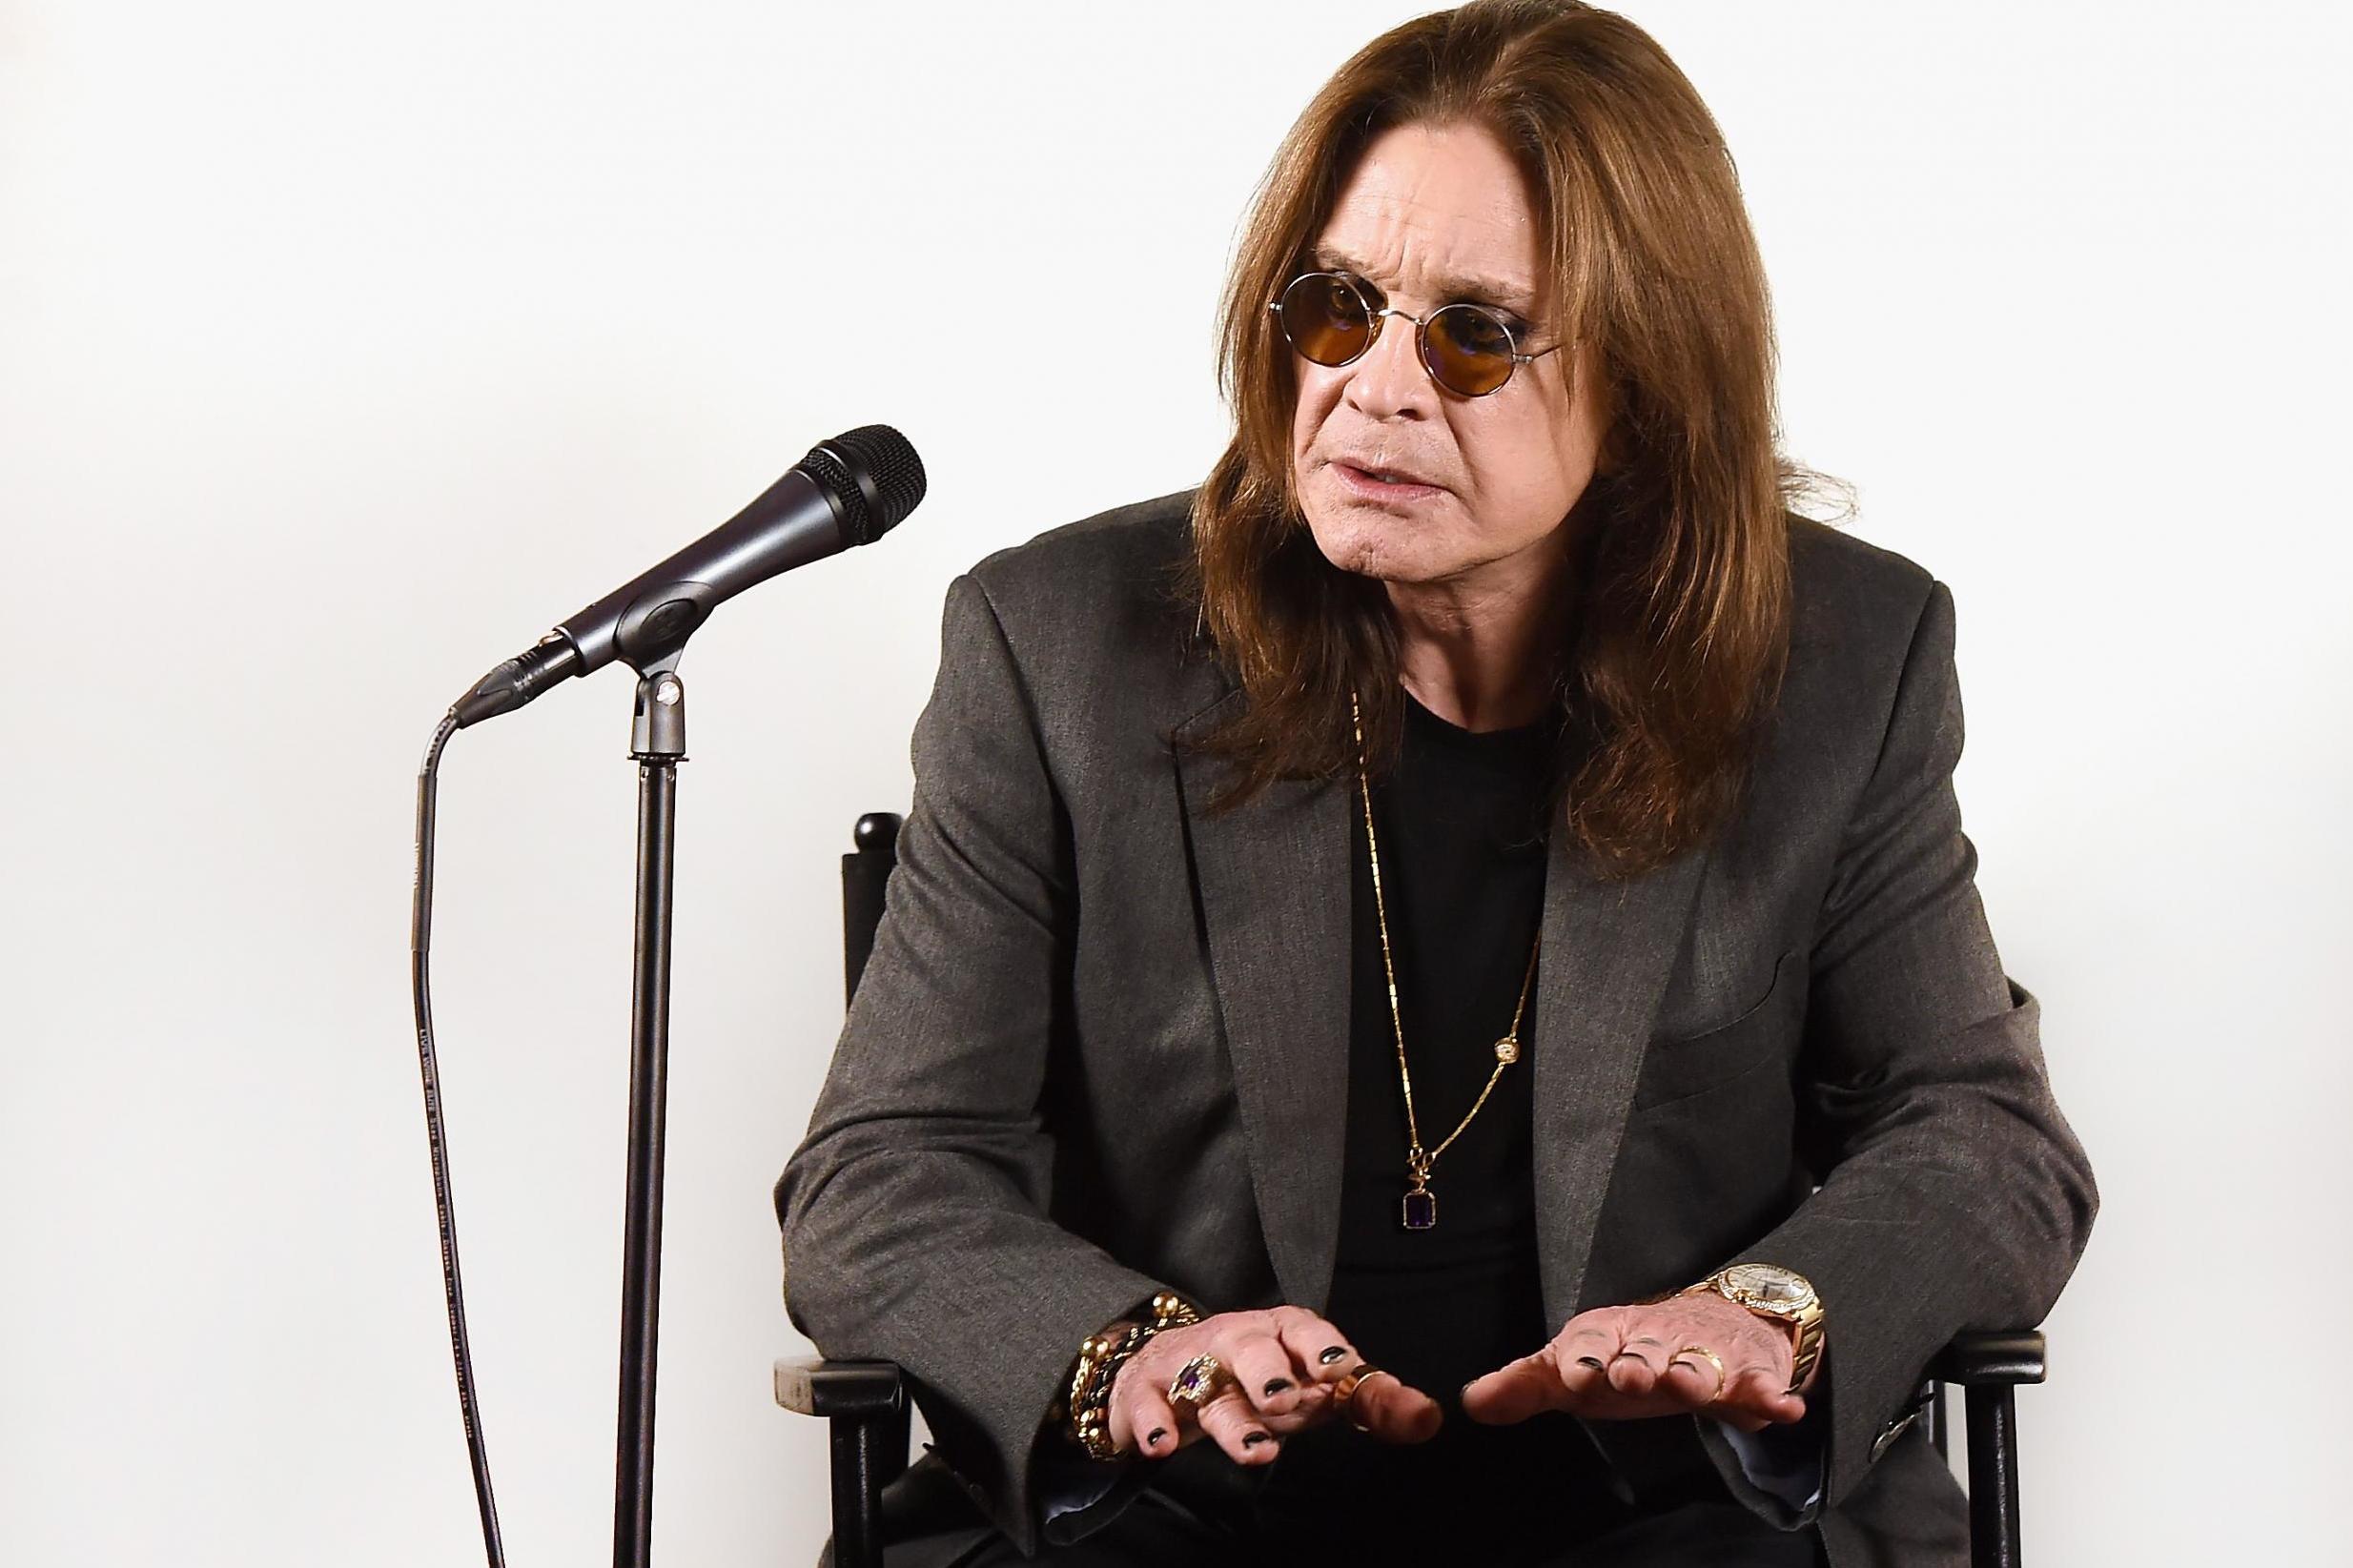 Ozzy Osbourne postpones all 2019 tour dates after suffering fall | The Independent